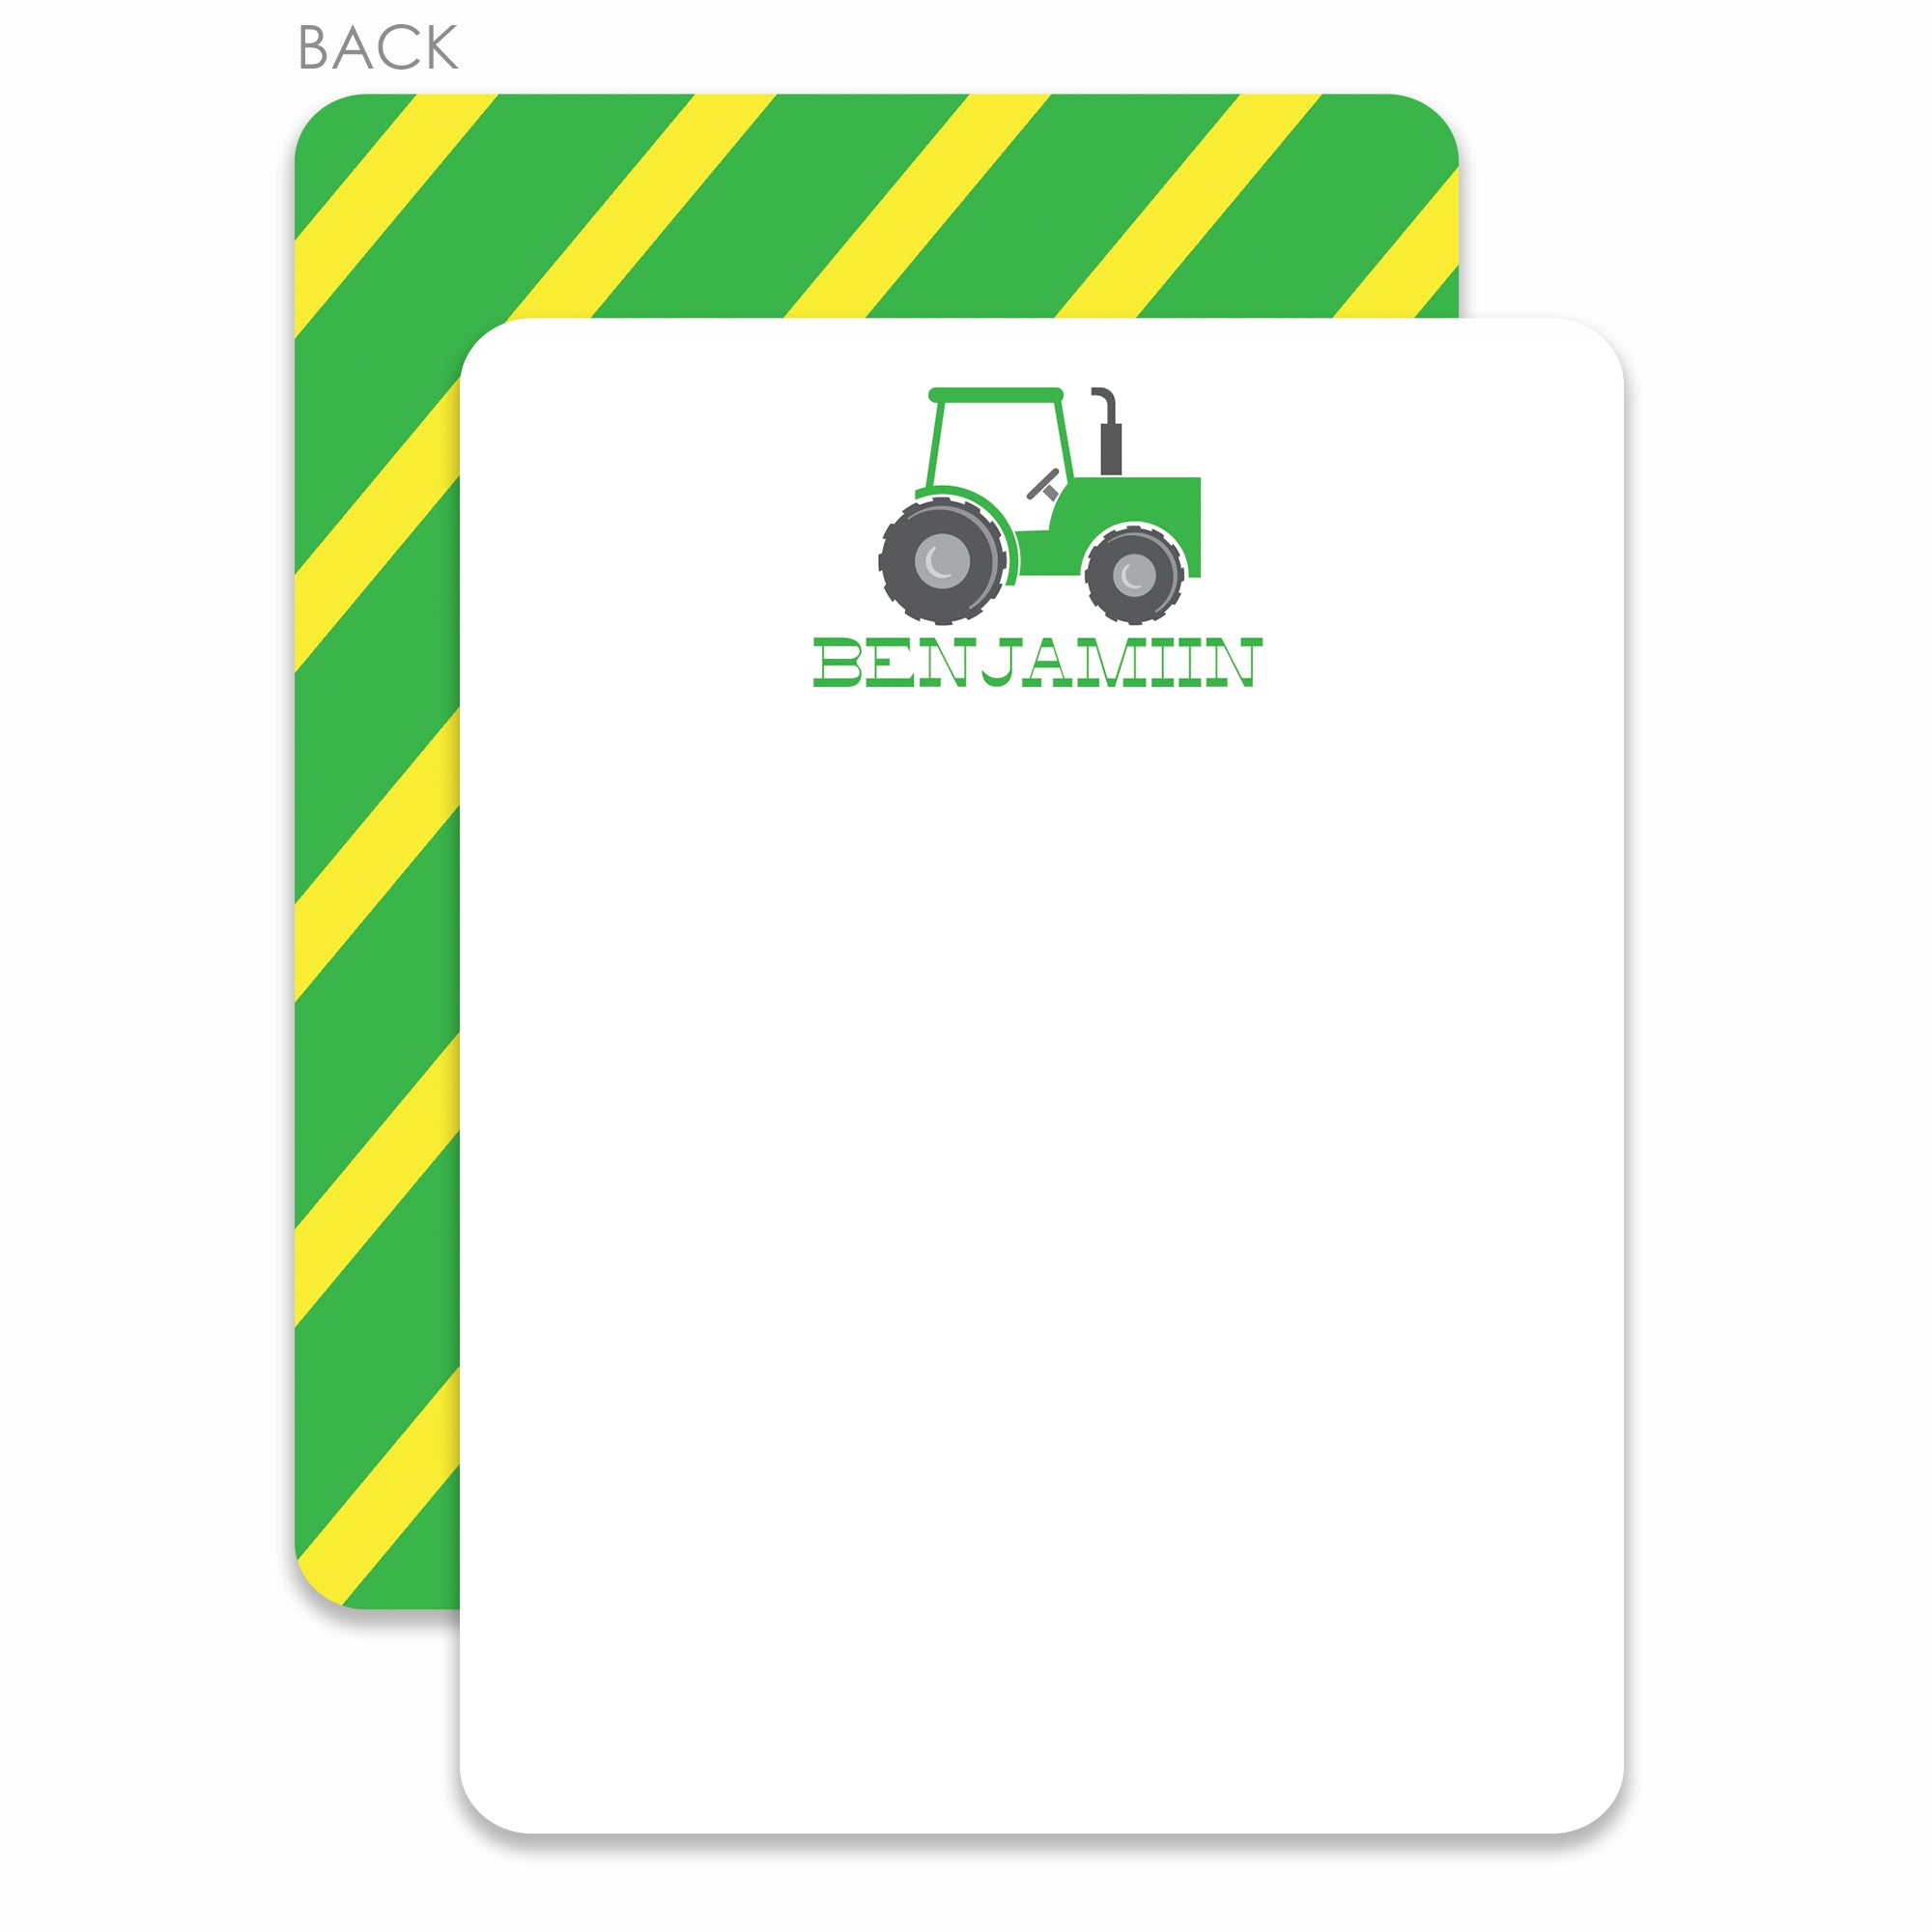 Tractor flat notecards stationery thank you cards, green tractor and yellow stripes